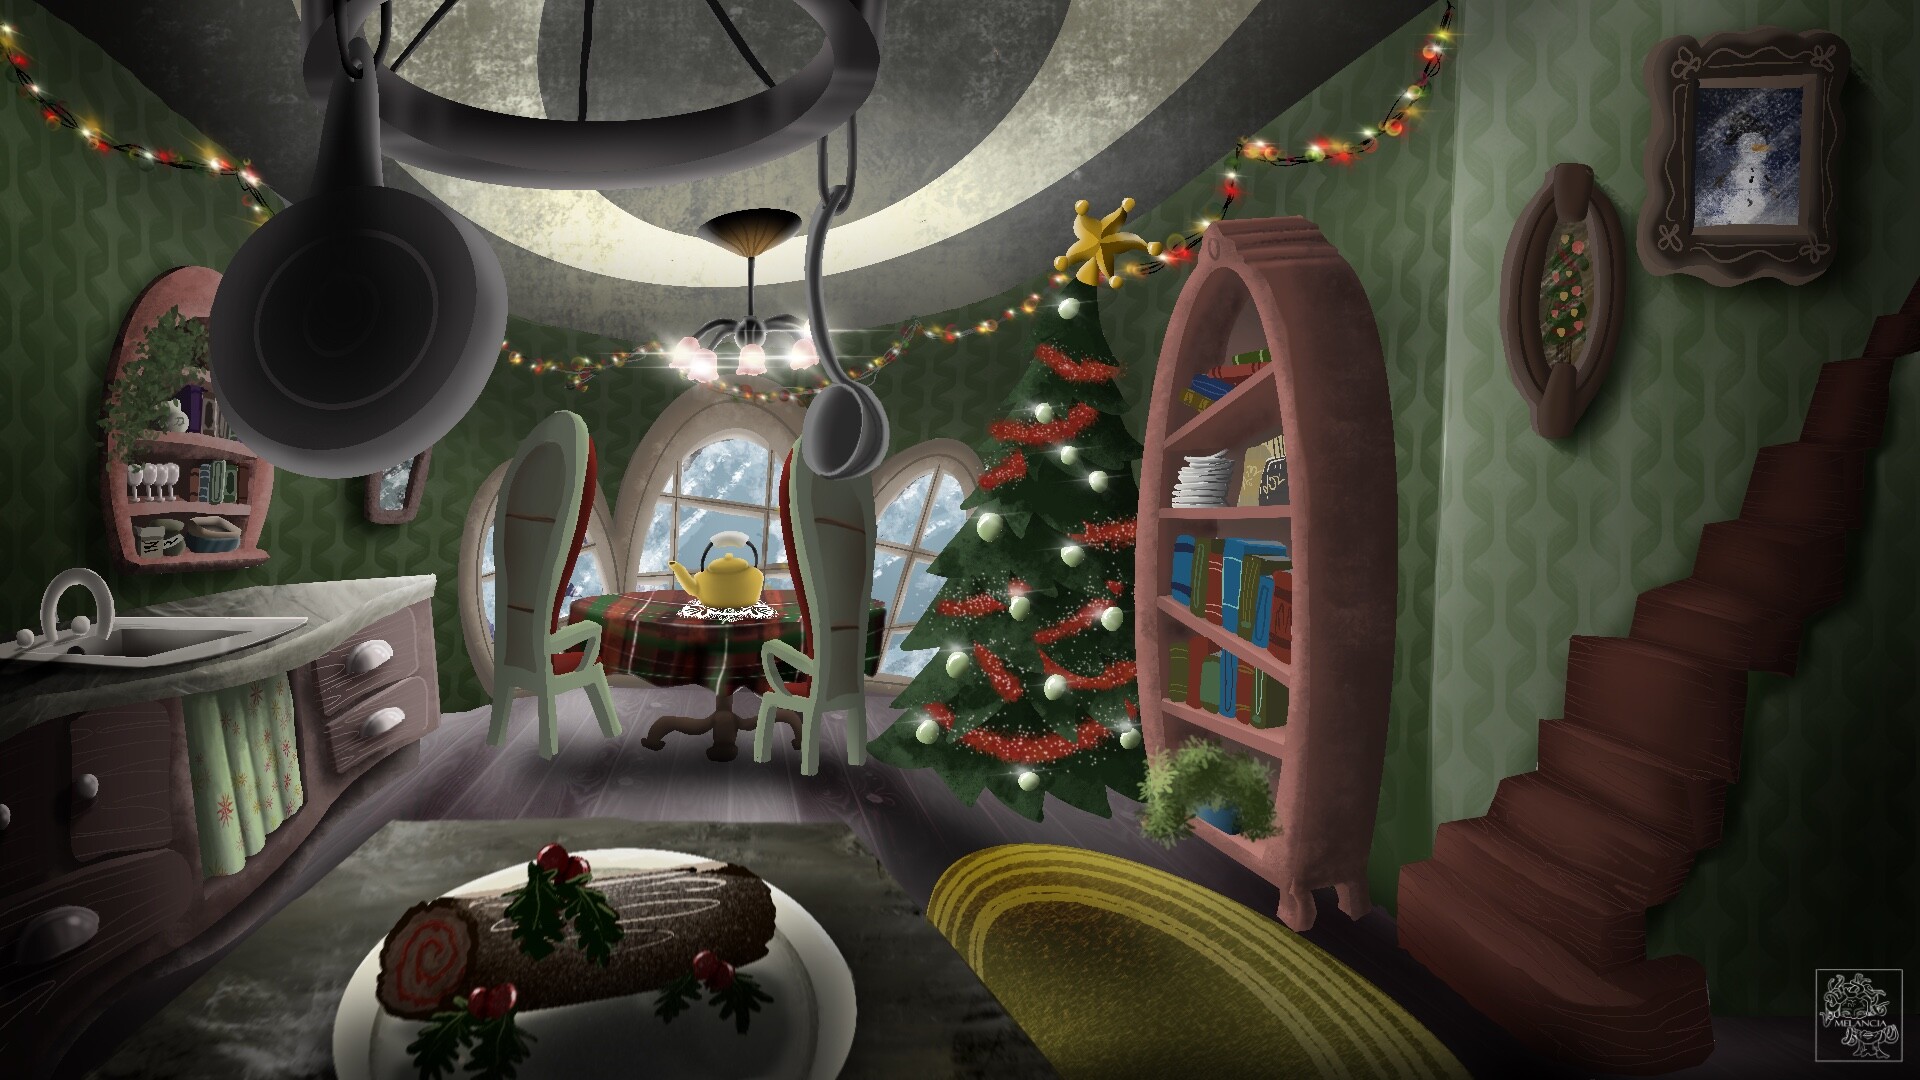 ArtStation - background design of The Grinch who stole christmas's kitchen